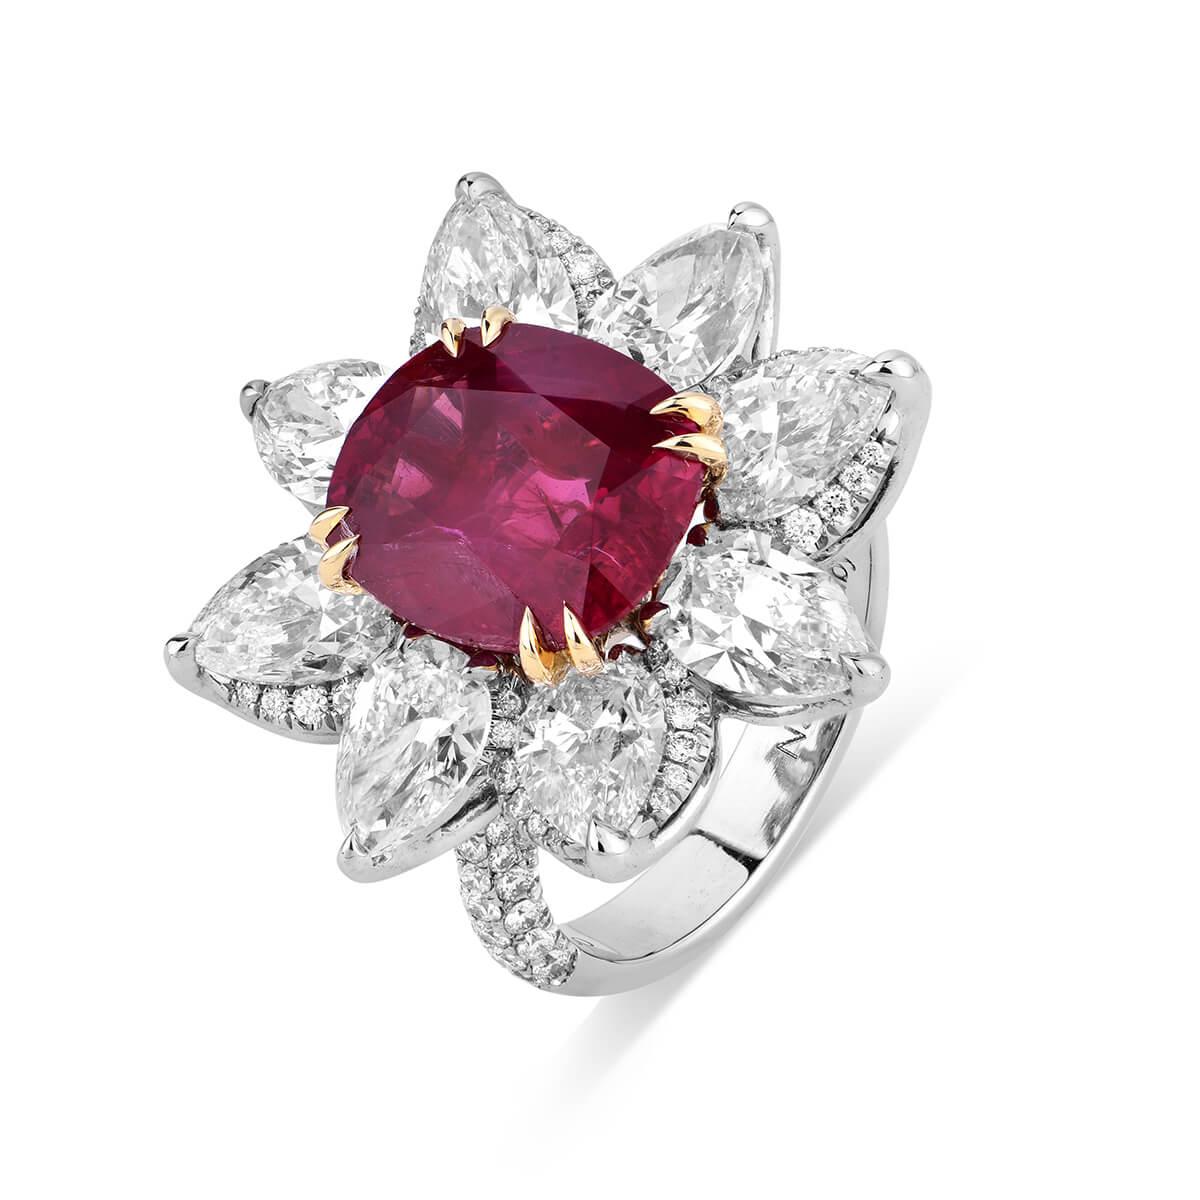 Natural, untreated red ruby surrounded by white diamonds. The main Ruby stone is 6.18 Carats, together with the White Diamonds makes a total of 12.44 Carats. Unheated. Dress Ring, Occassion Ring, Cocktail Ring. 
This Item can be altered and